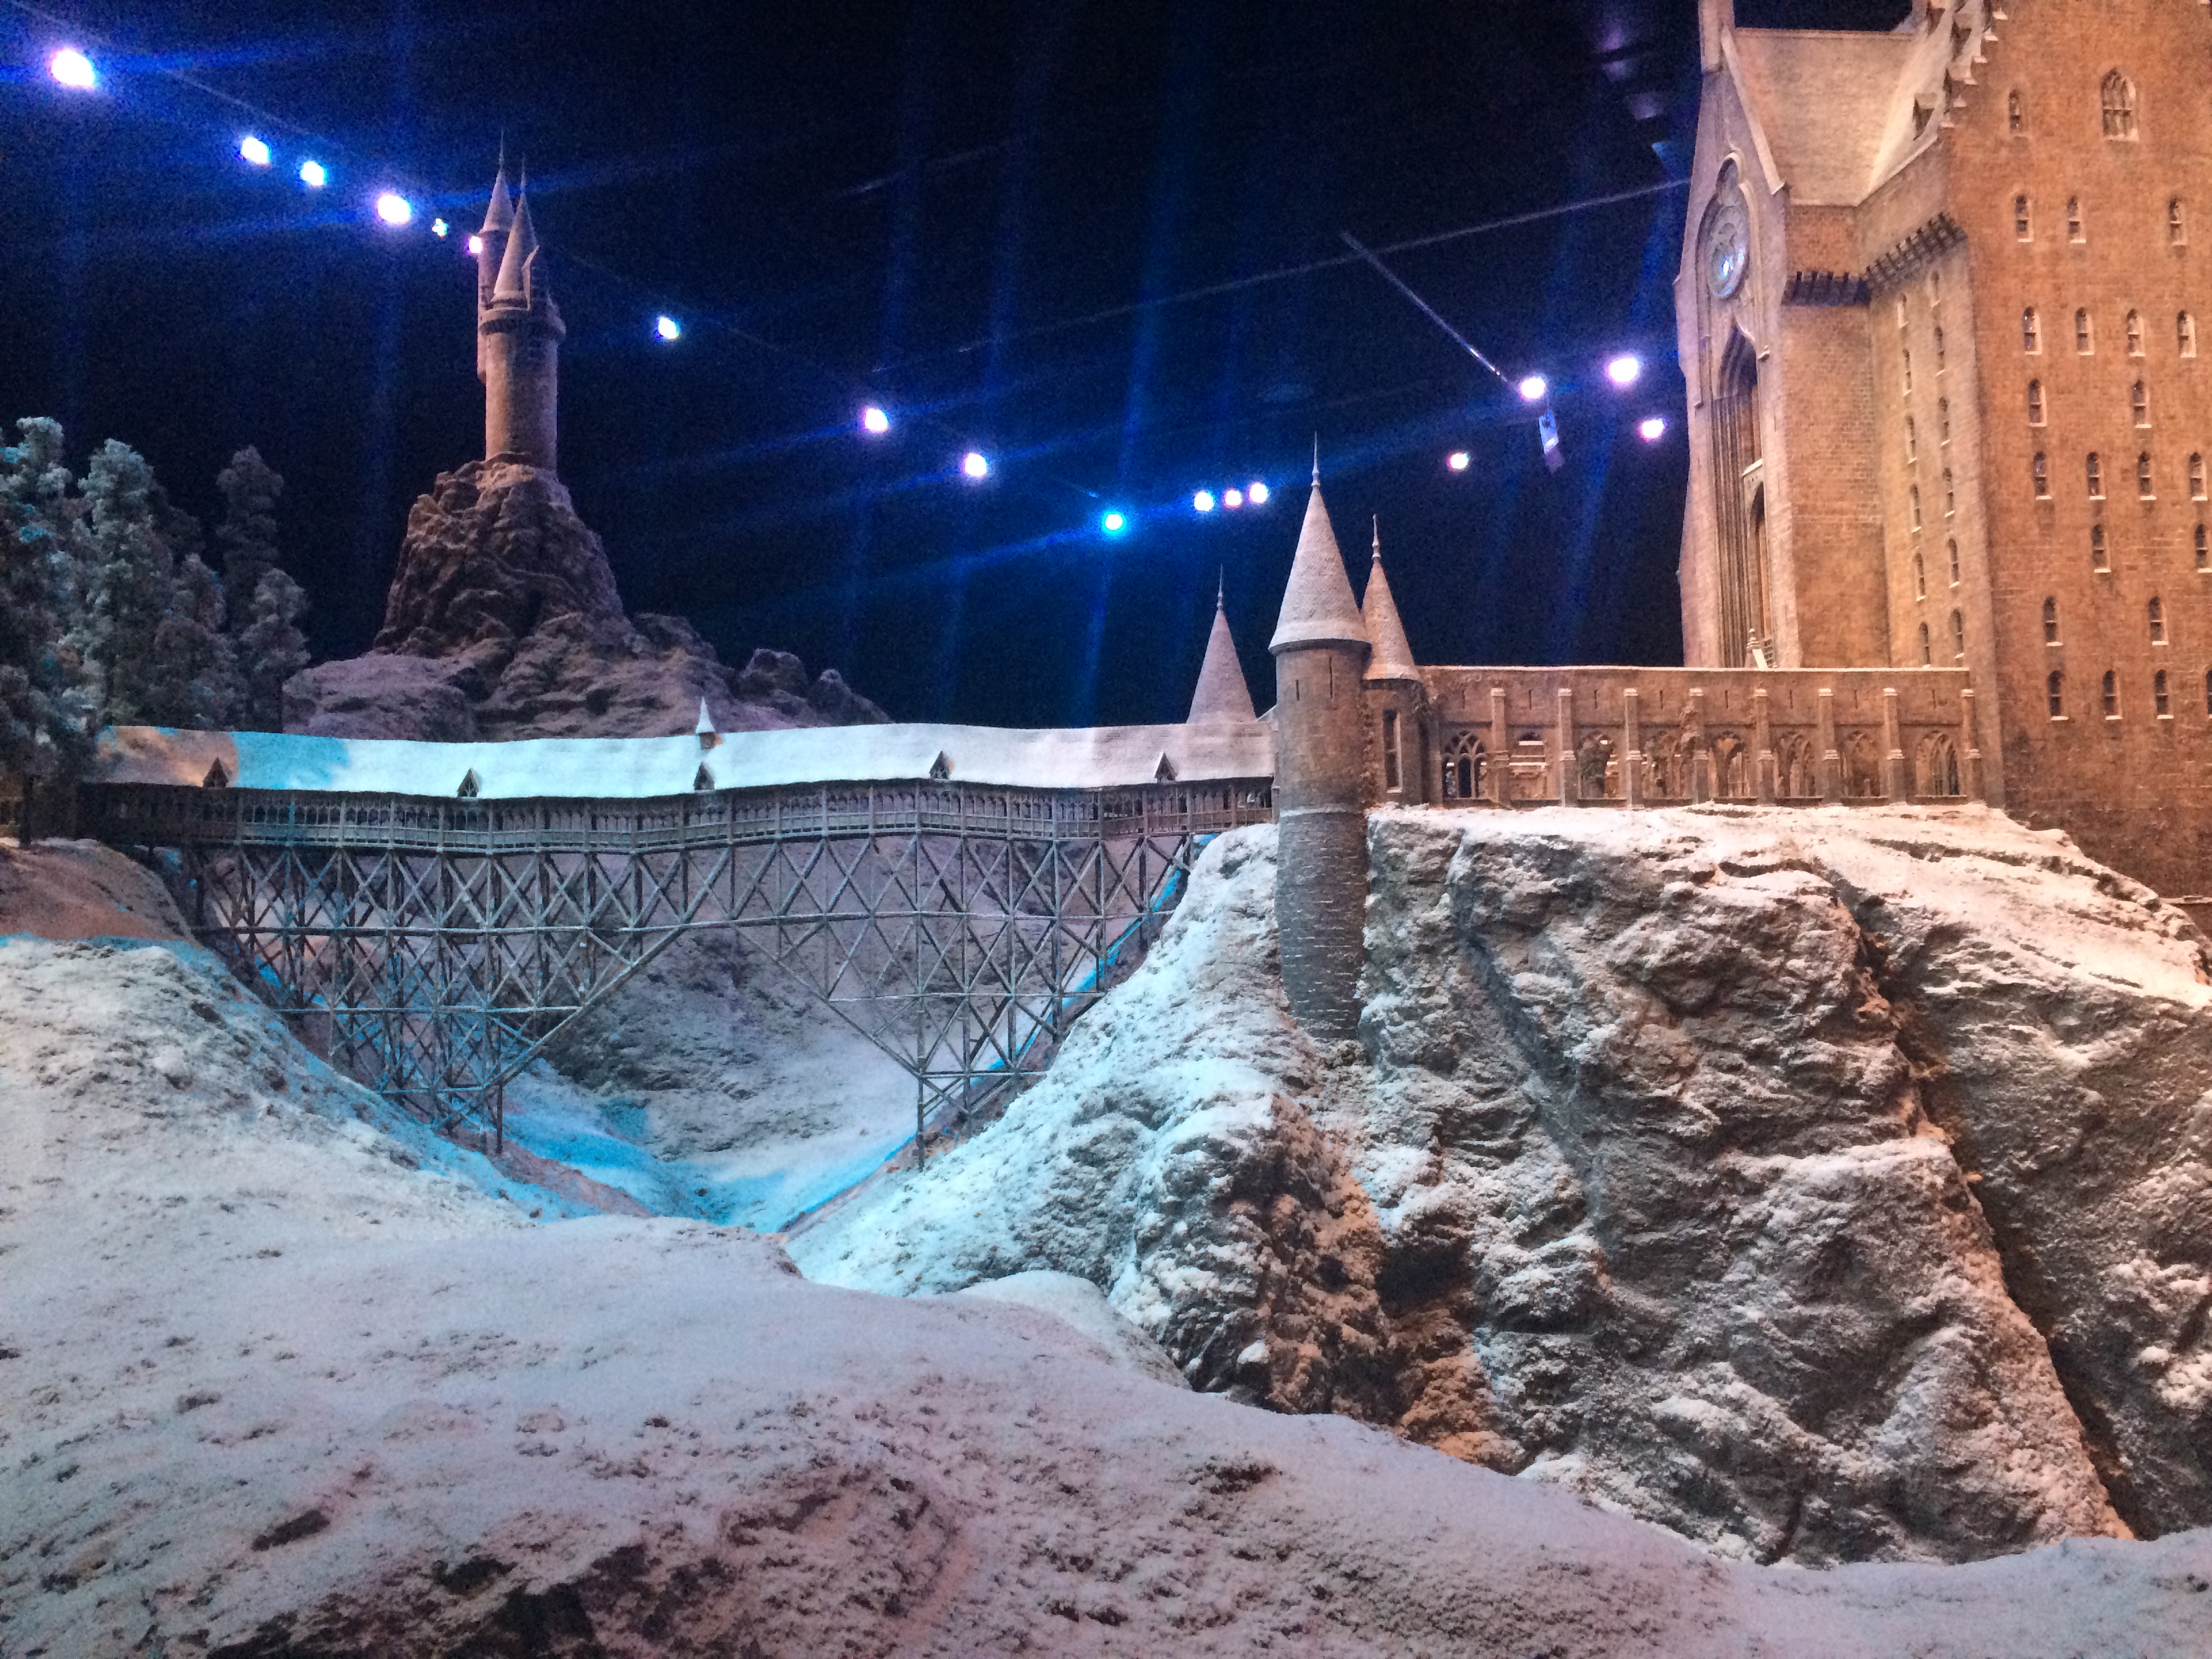 A 1:24 scale model of the Hogwarts Castle was covered with snow for the festive season at the Warner Bros Studio Tour in Watford, London. (Naina Bajekal for TIME)